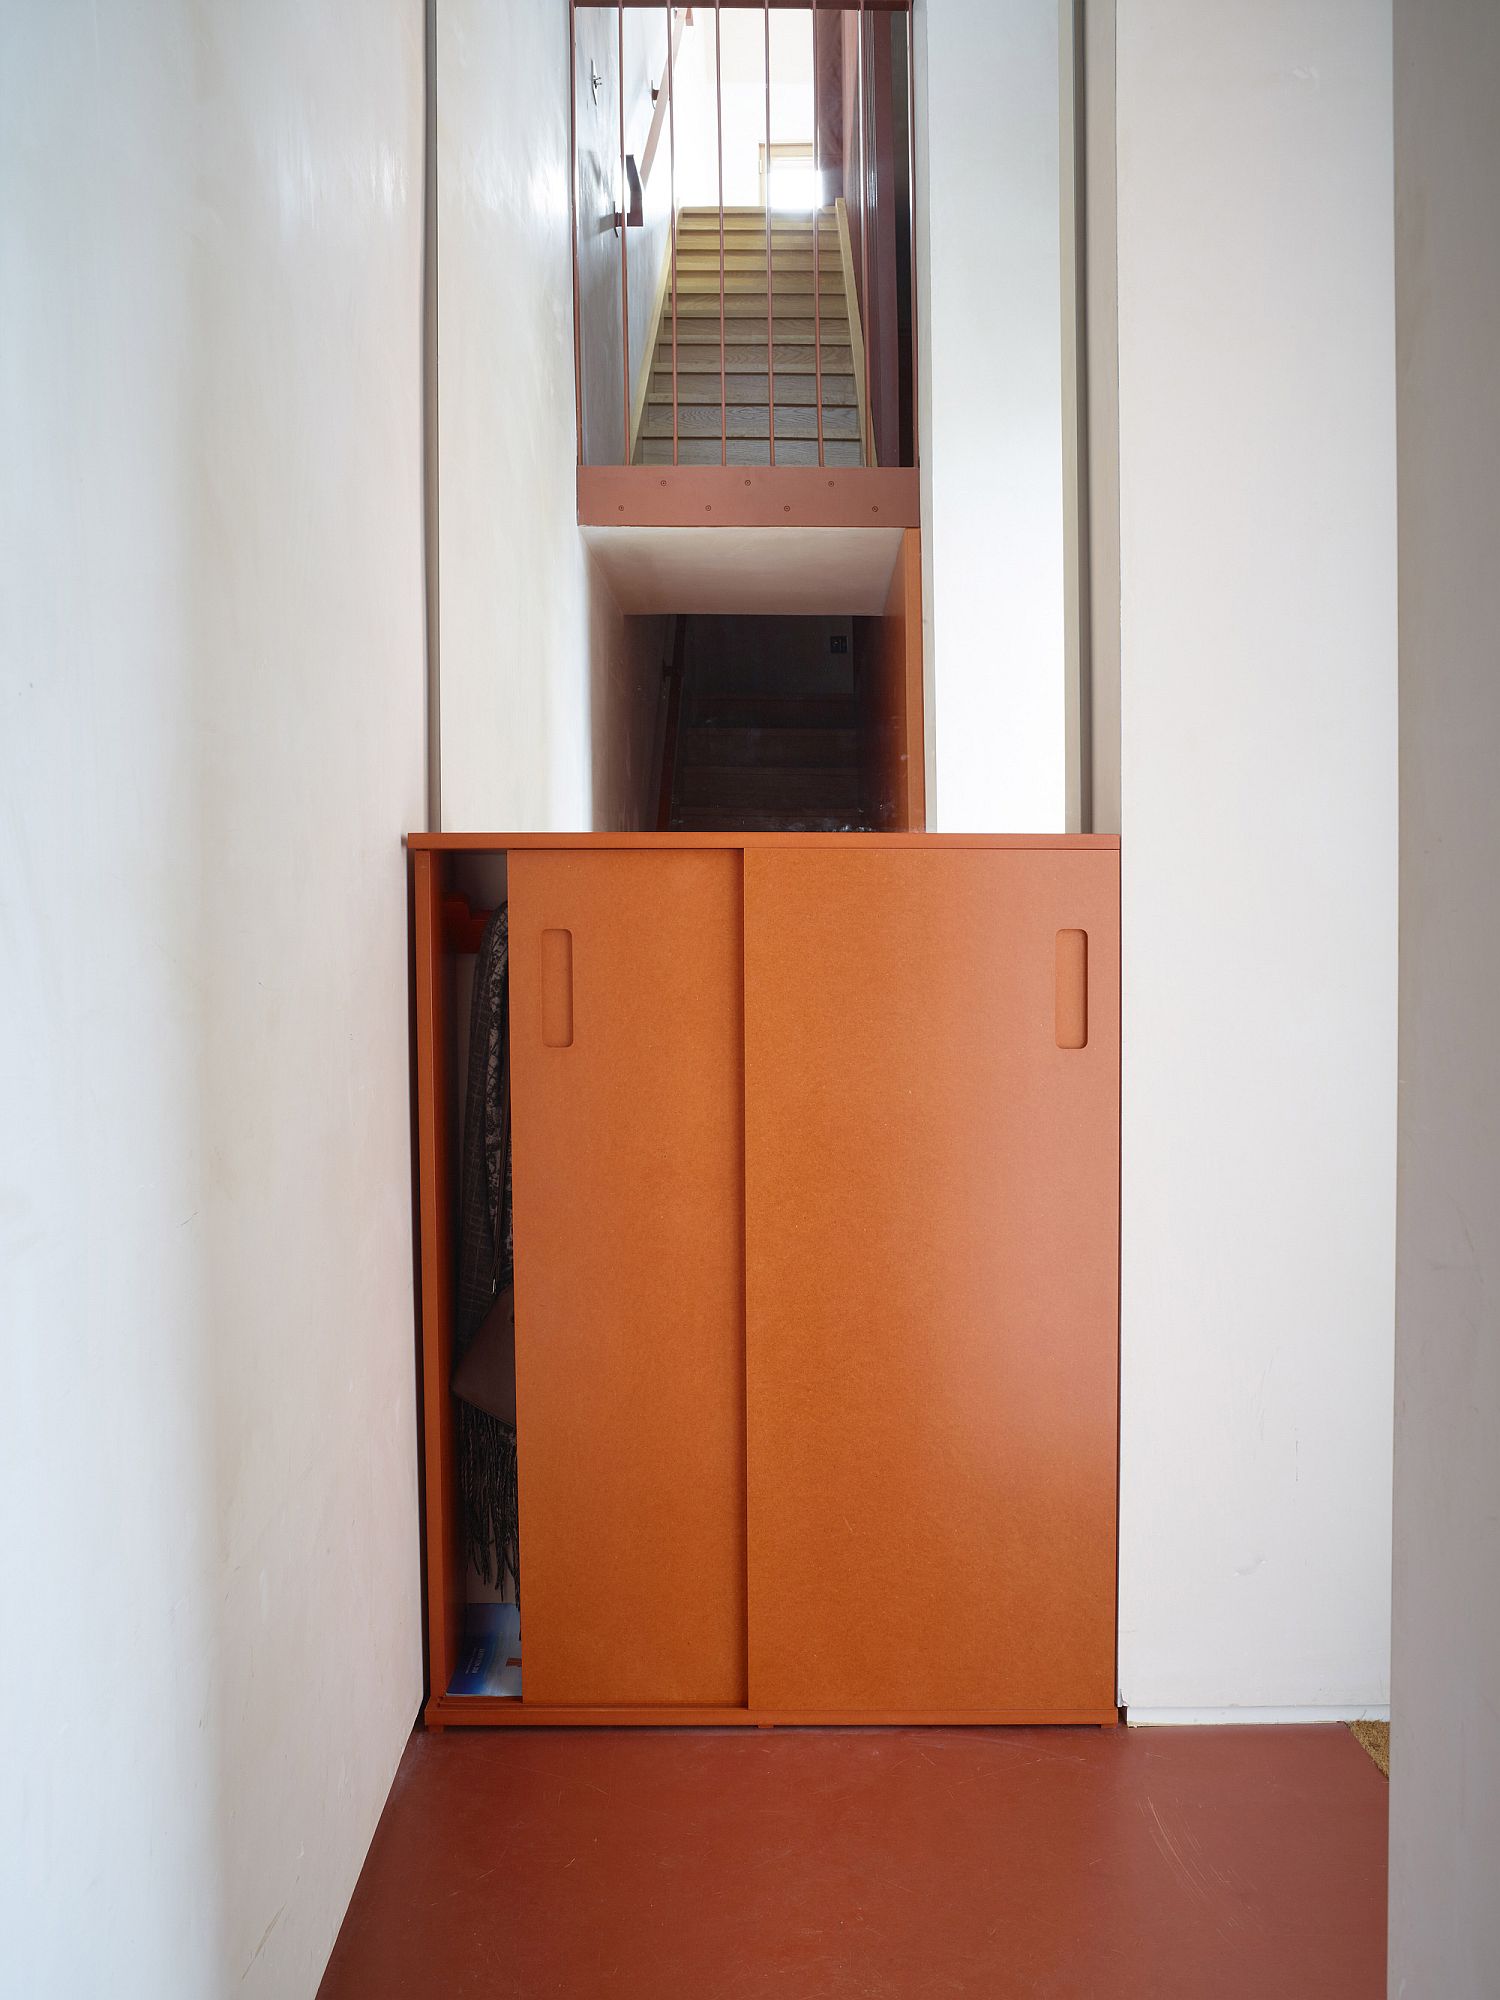 Stairway and the interior also embraces orange gleefully